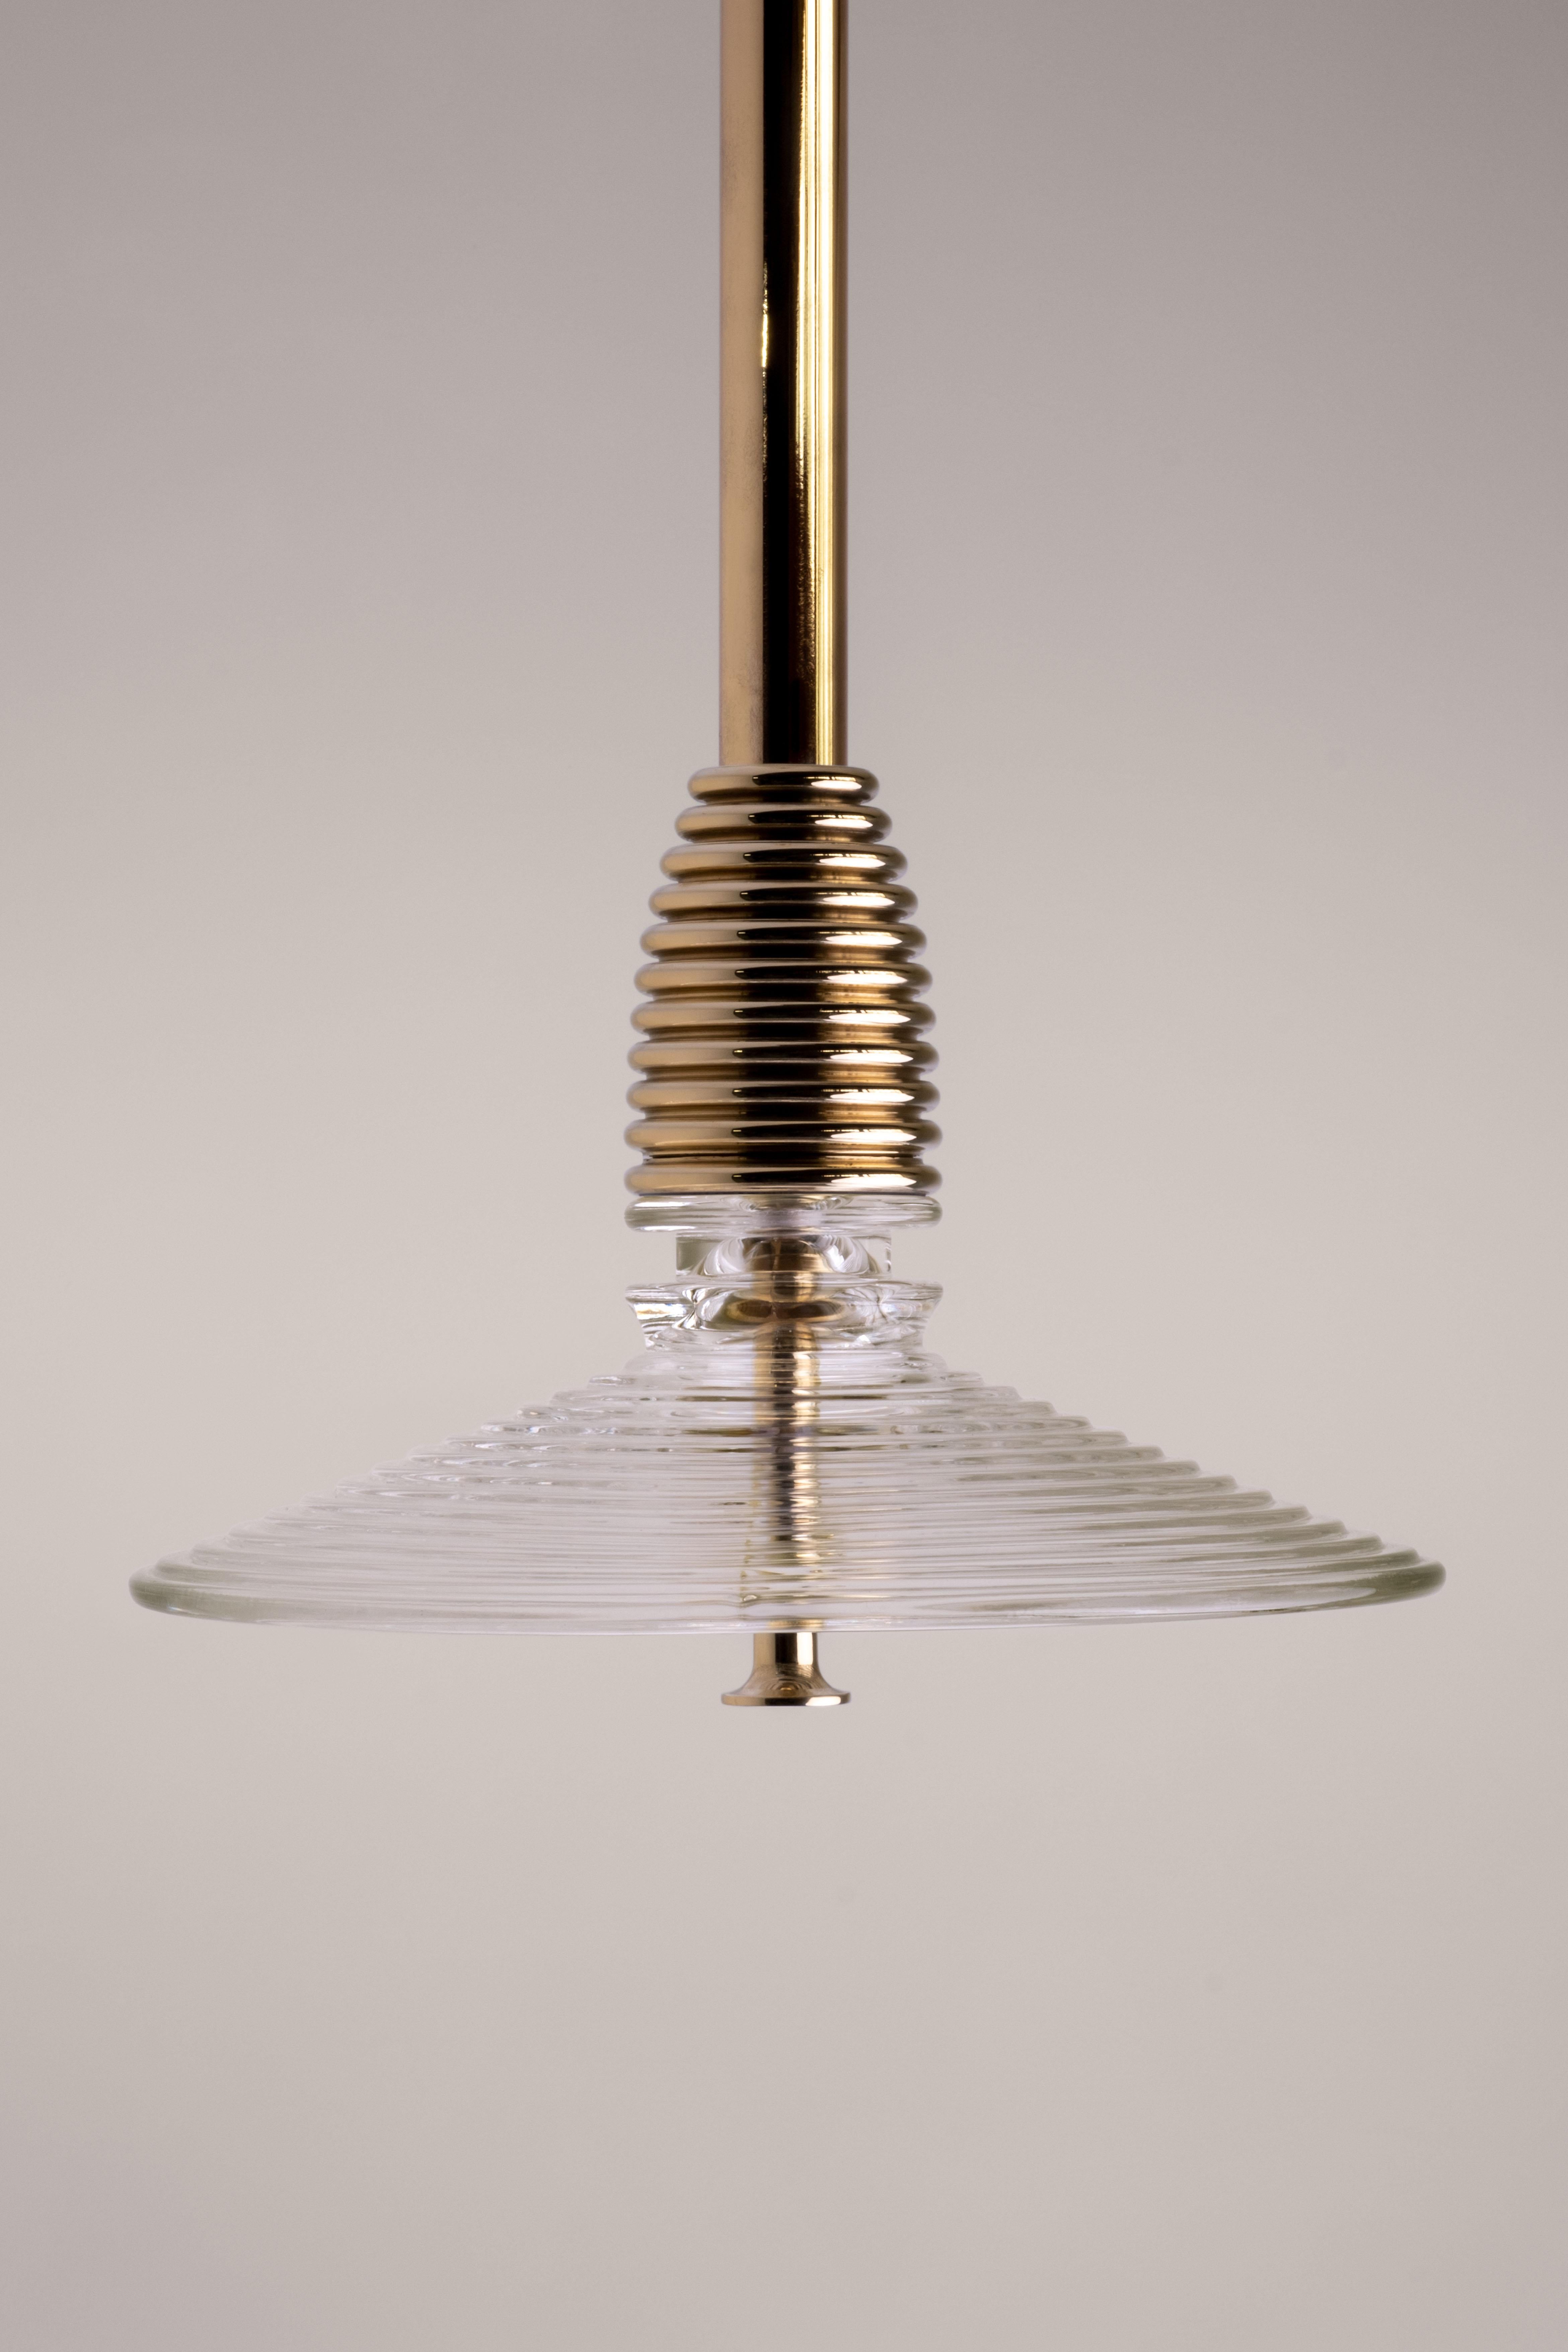 The Insulator 'B' Pendant in dark brass and clear glass by NOVOCASTRIAN deco For Sale 4